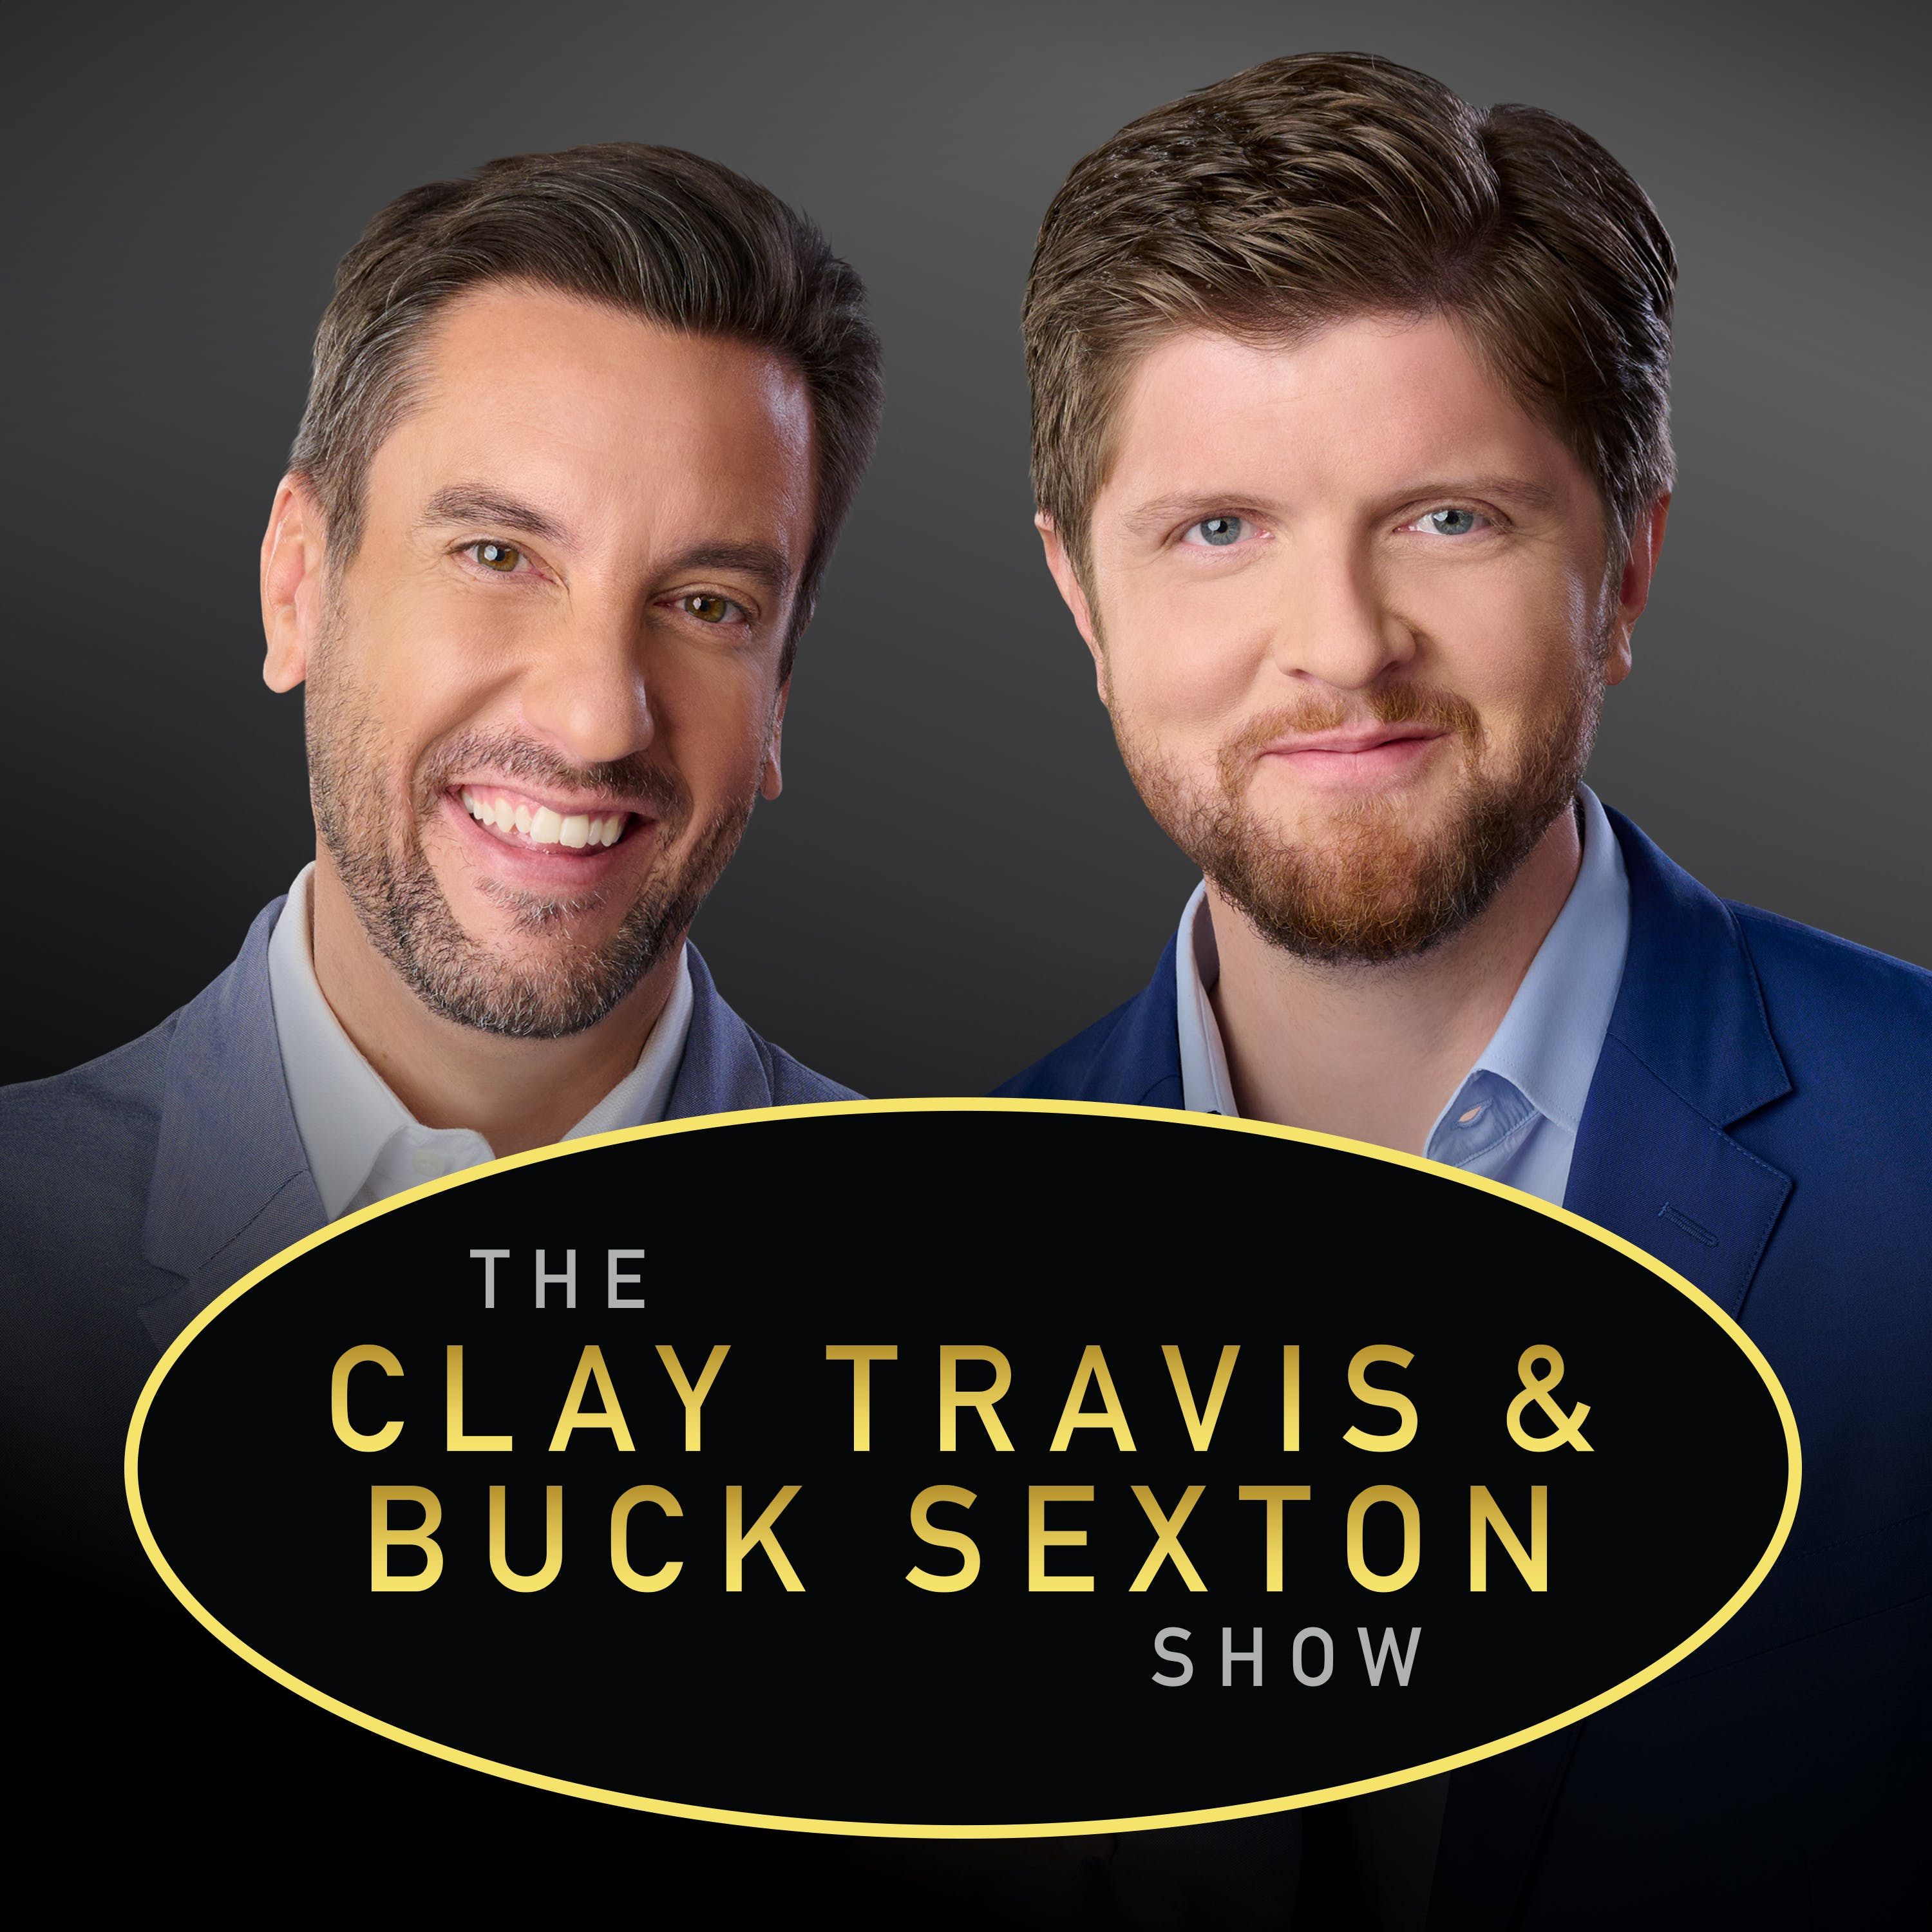 Clay Travis and Buck Sexton Show H2 – Sep 13 2021